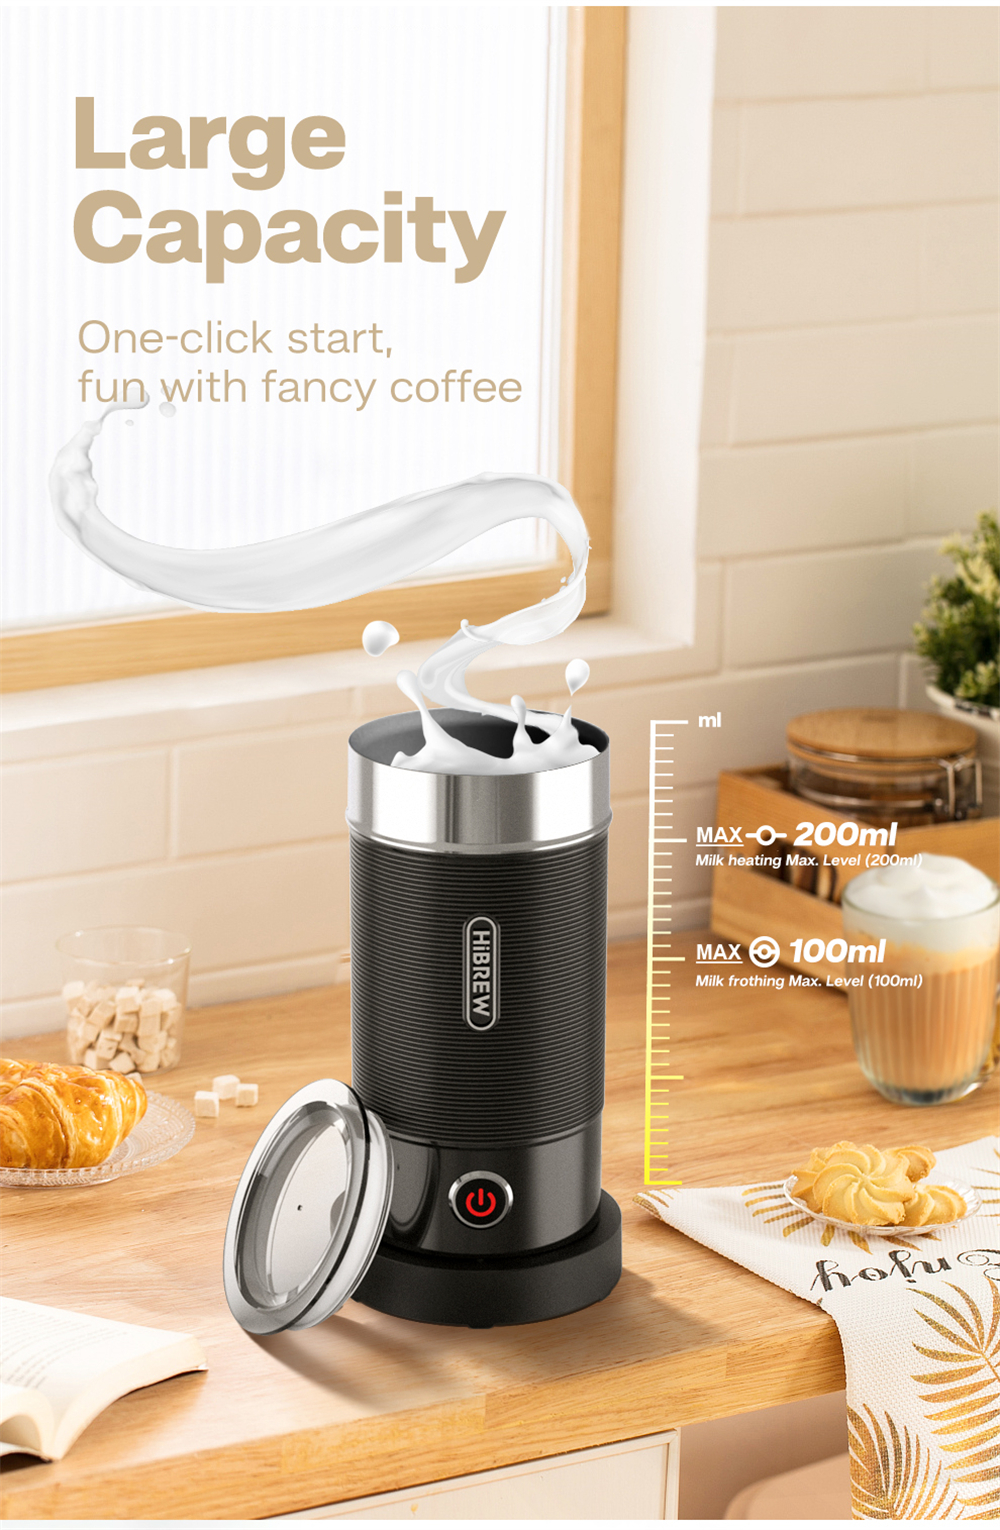 HiBREW-M1A-Milk-Frother-Frothing-Foamer-Chocolate-Mixer-ColdHot-Latte-Cappuccino-fully-automatic-Mil-1911176-5